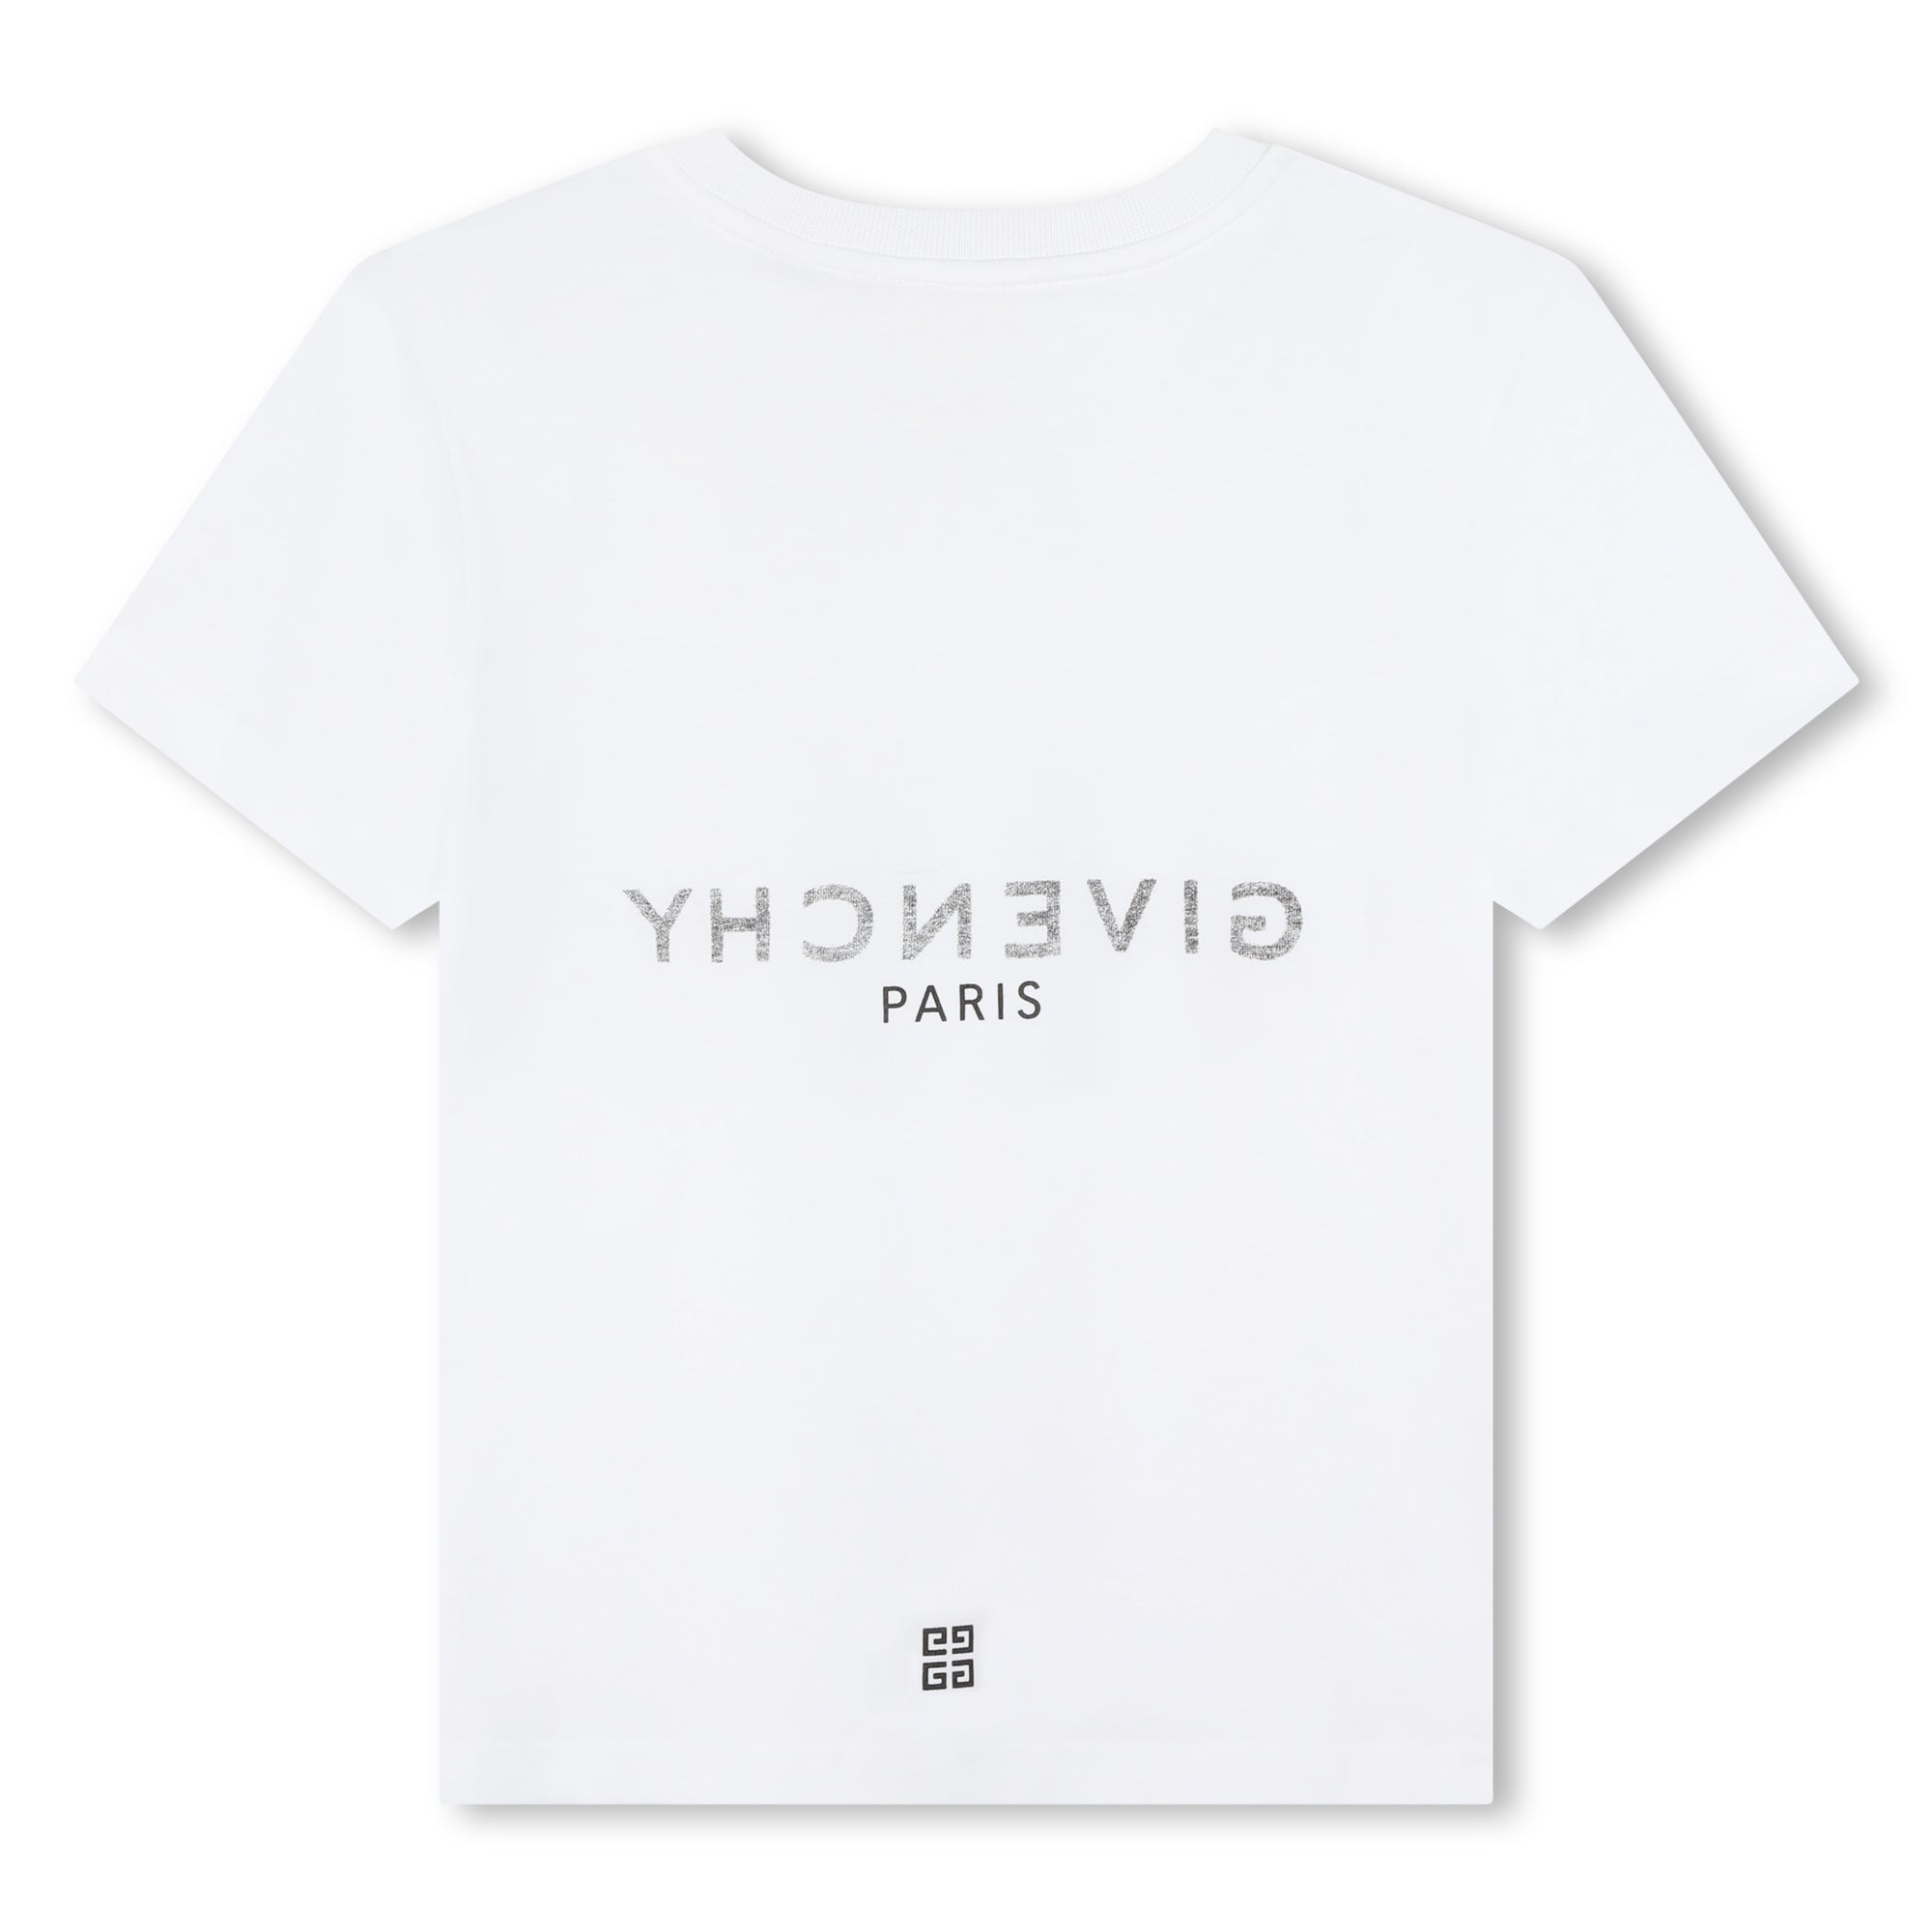 Givenchy Boys Classic Logo T-shirt in White